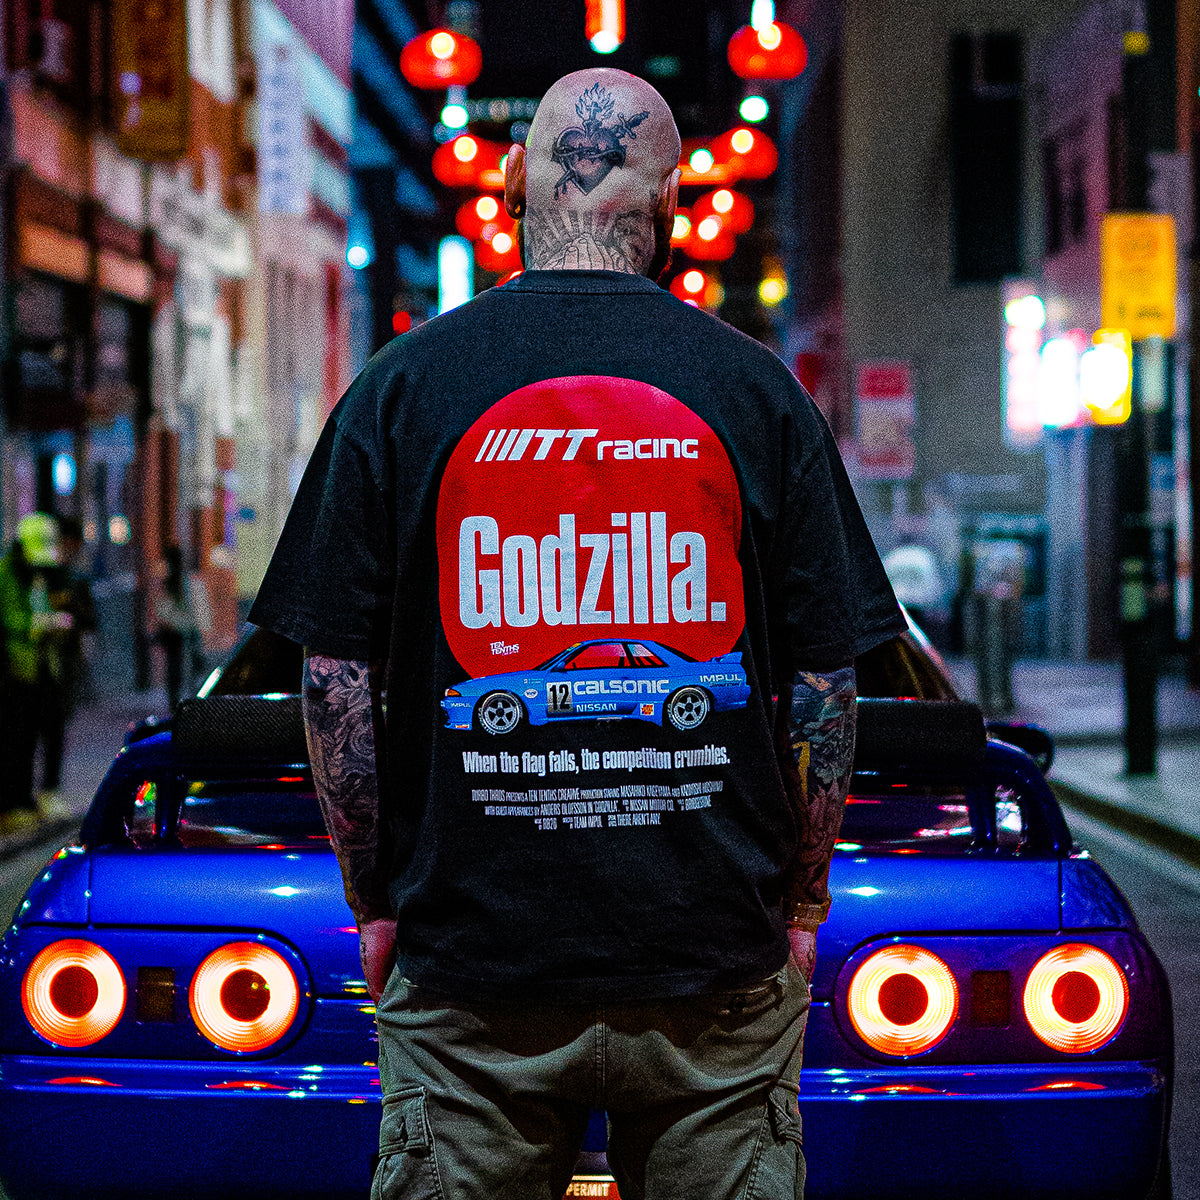 Tattooed man wearing Dark brown graphic tee featuring the Calsonic R32 GT-R car